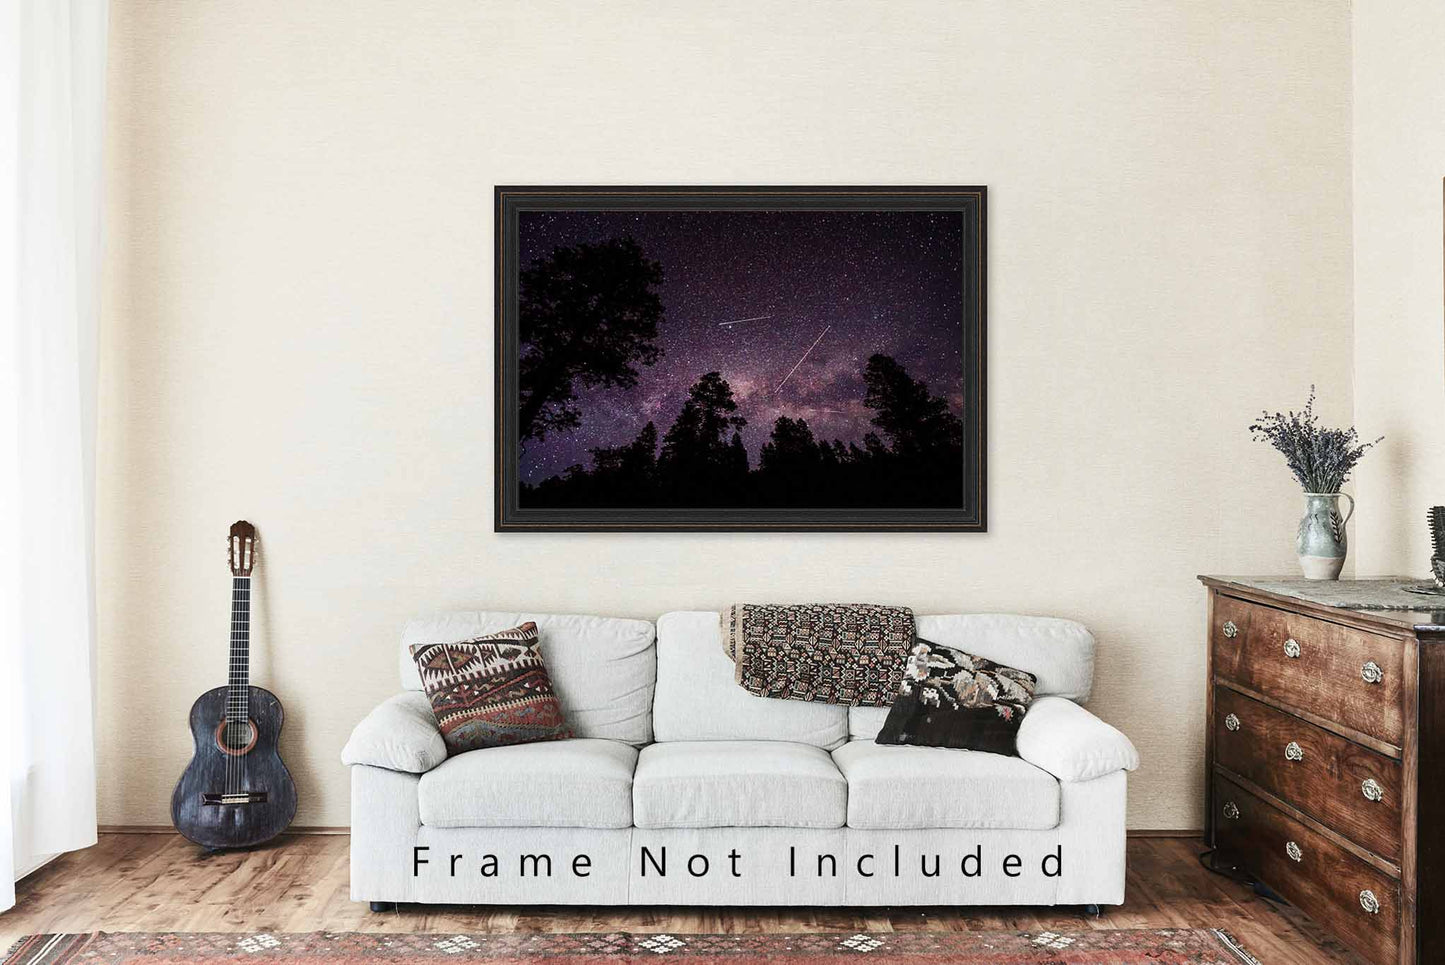 Celestial Photography Print (Not Framed) Picture of Shooting Star, Plane and Satellite in Colorado Night Sky Wall Art Rocky Mountain Decor